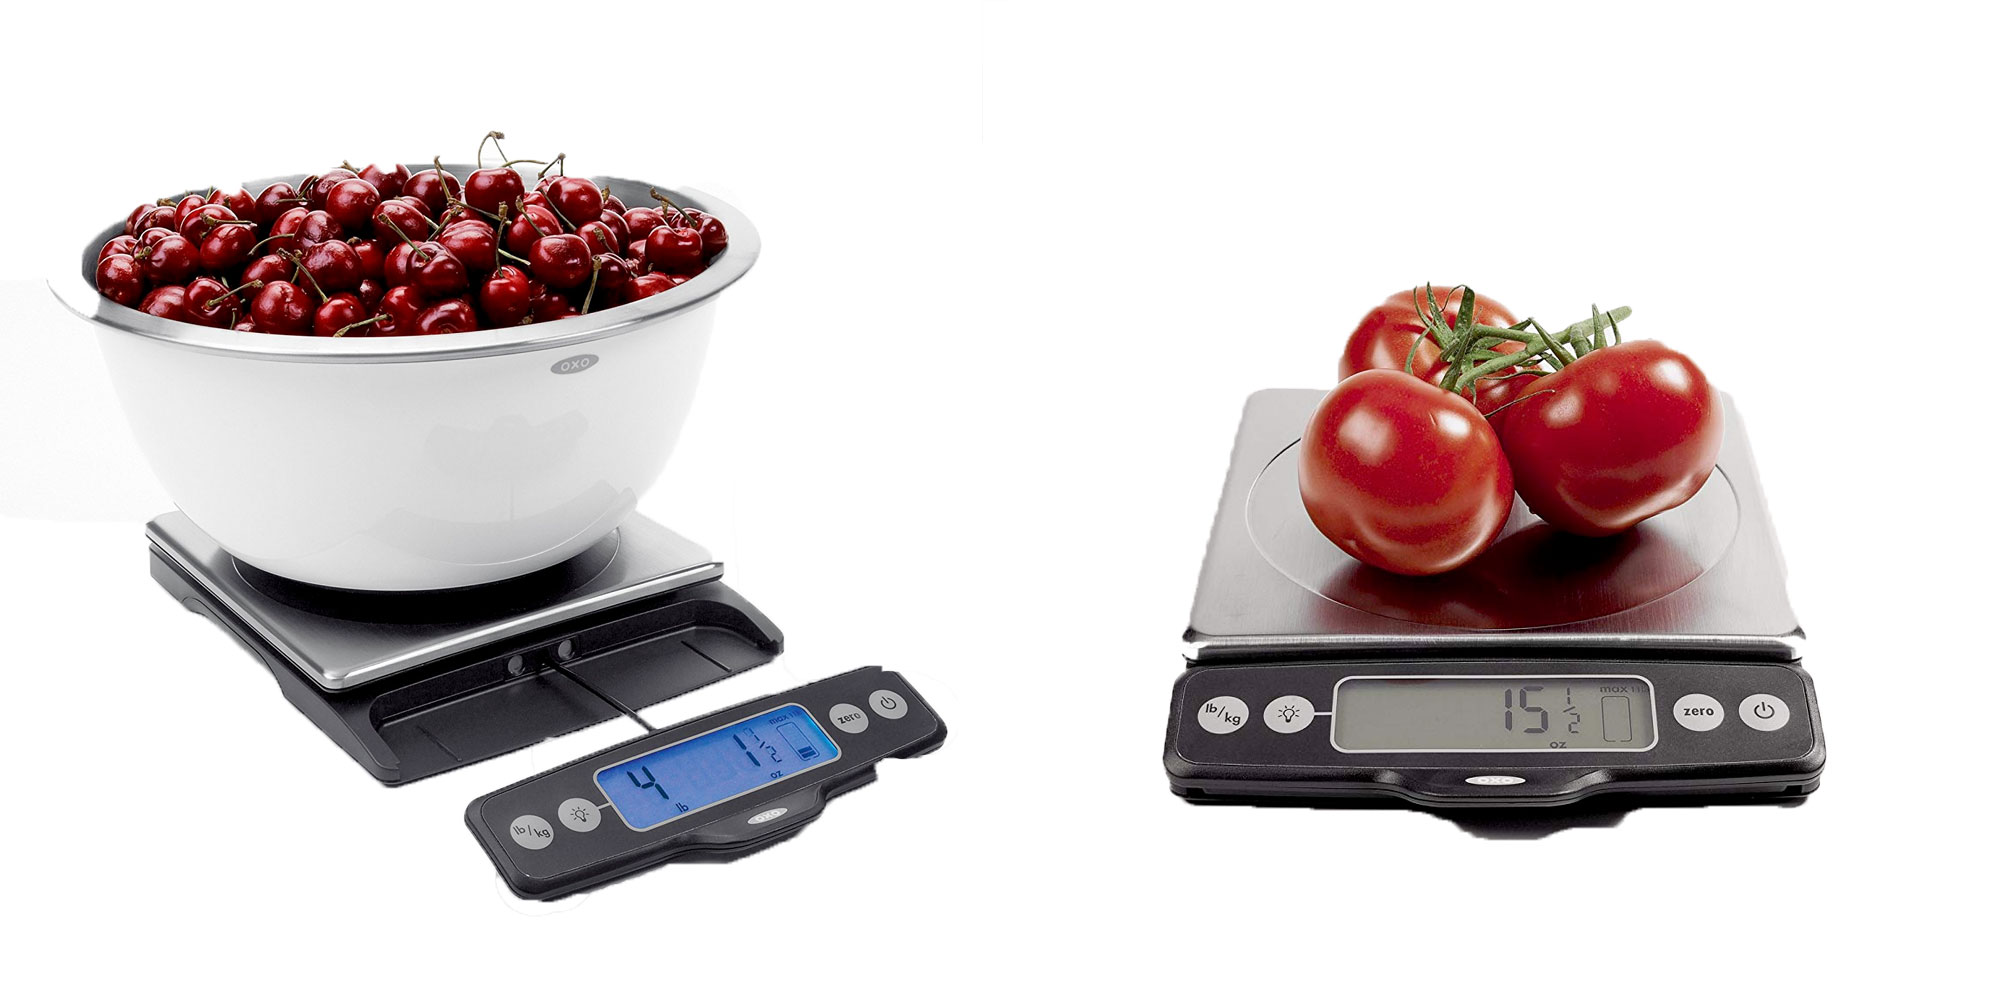 OXO 5-lb. Food Scale With Pull Out Display